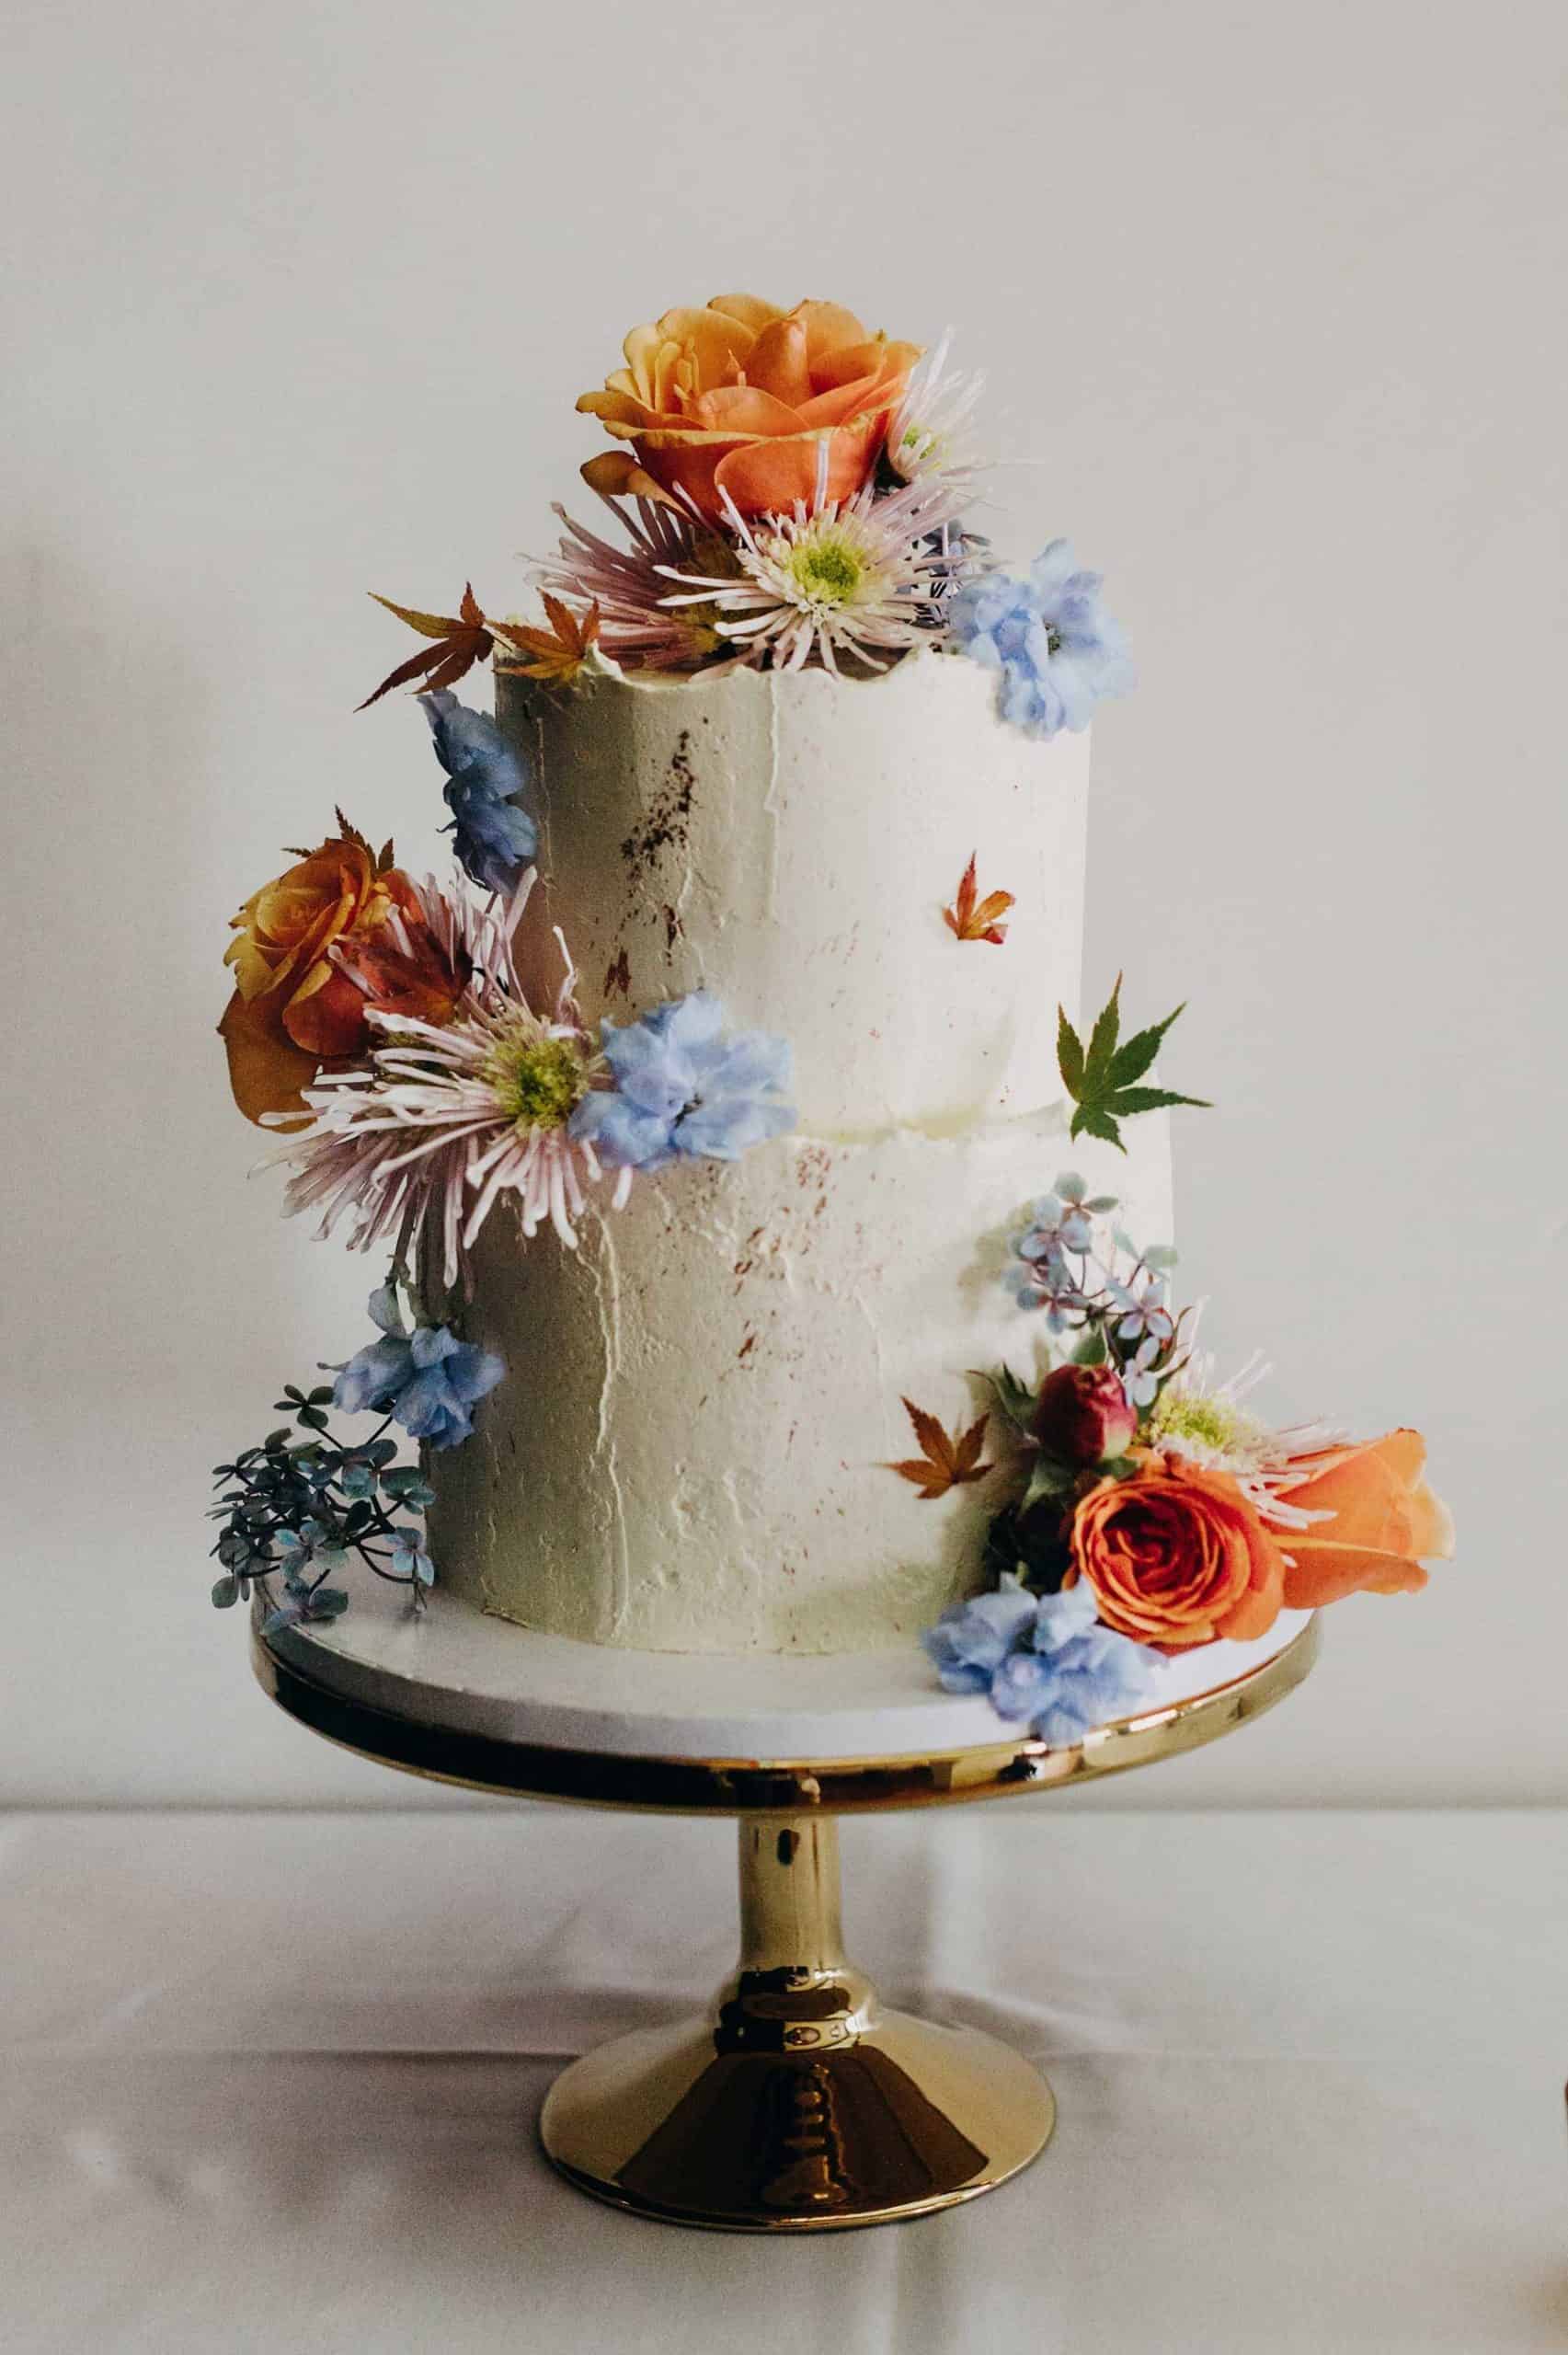 best wedding cakes of 2019 - simple with fresh flowers